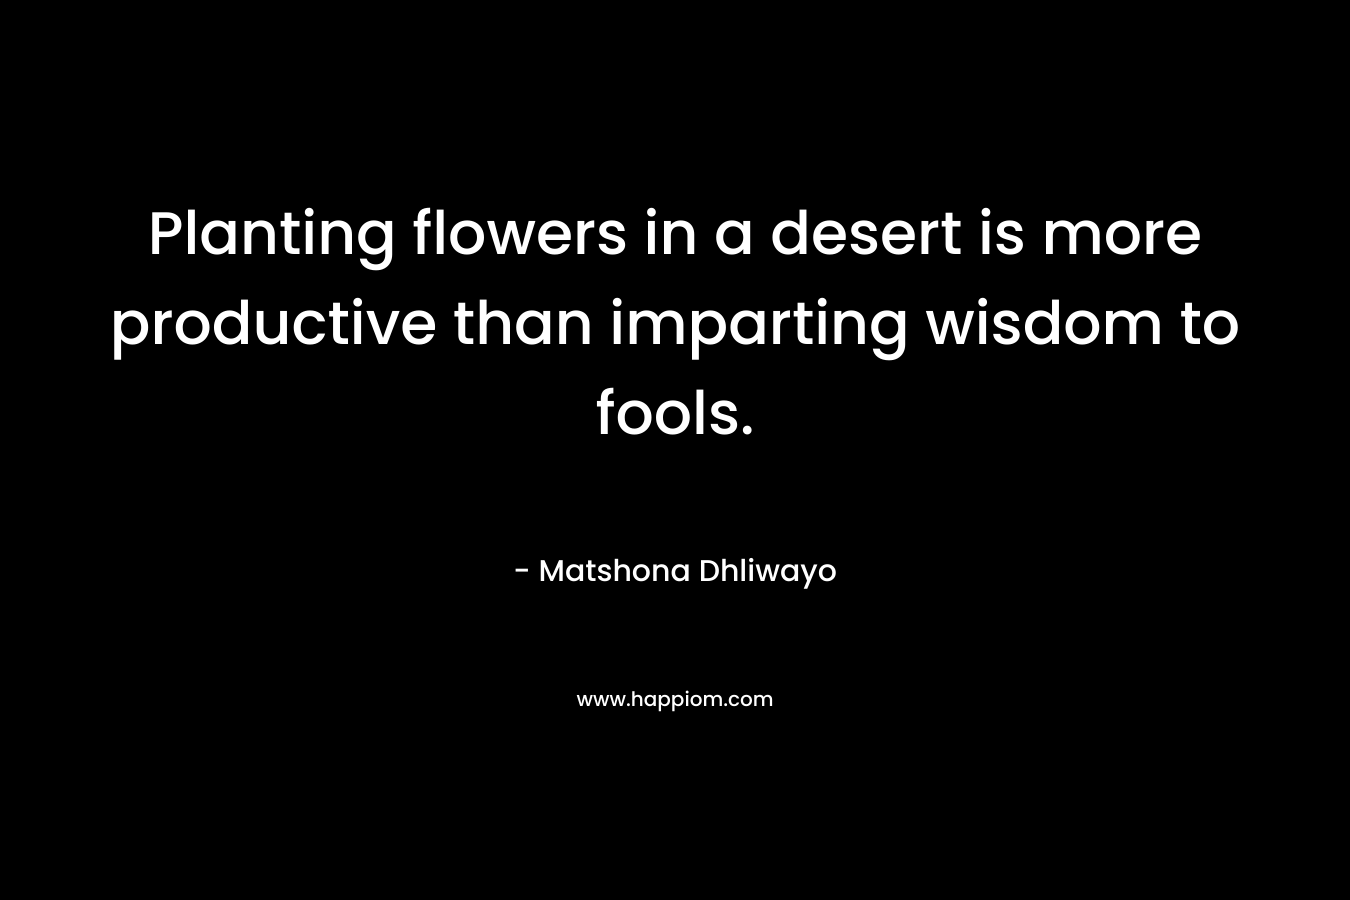 Planting flowers in a desert is more productive than imparting wisdom to fools. – Matshona Dhliwayo